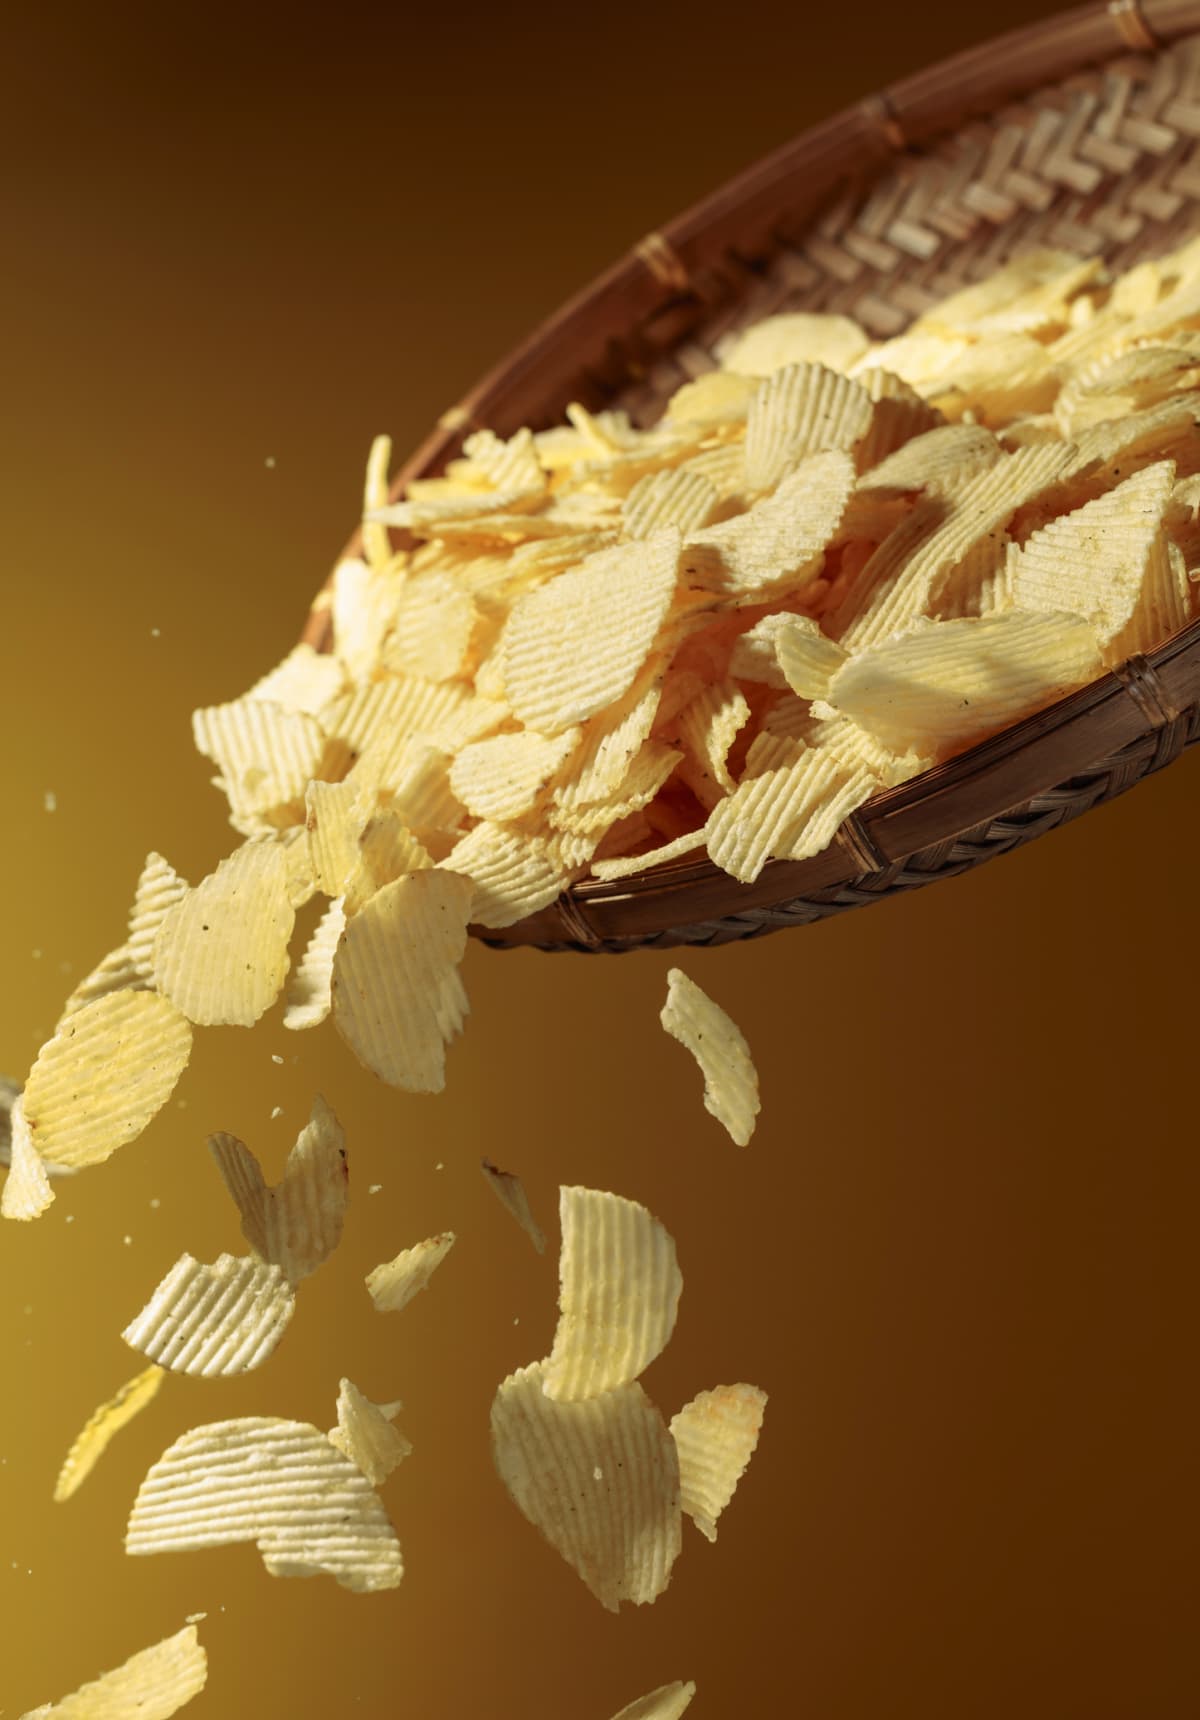 Falling potato chips on a yellow background. Copy space.